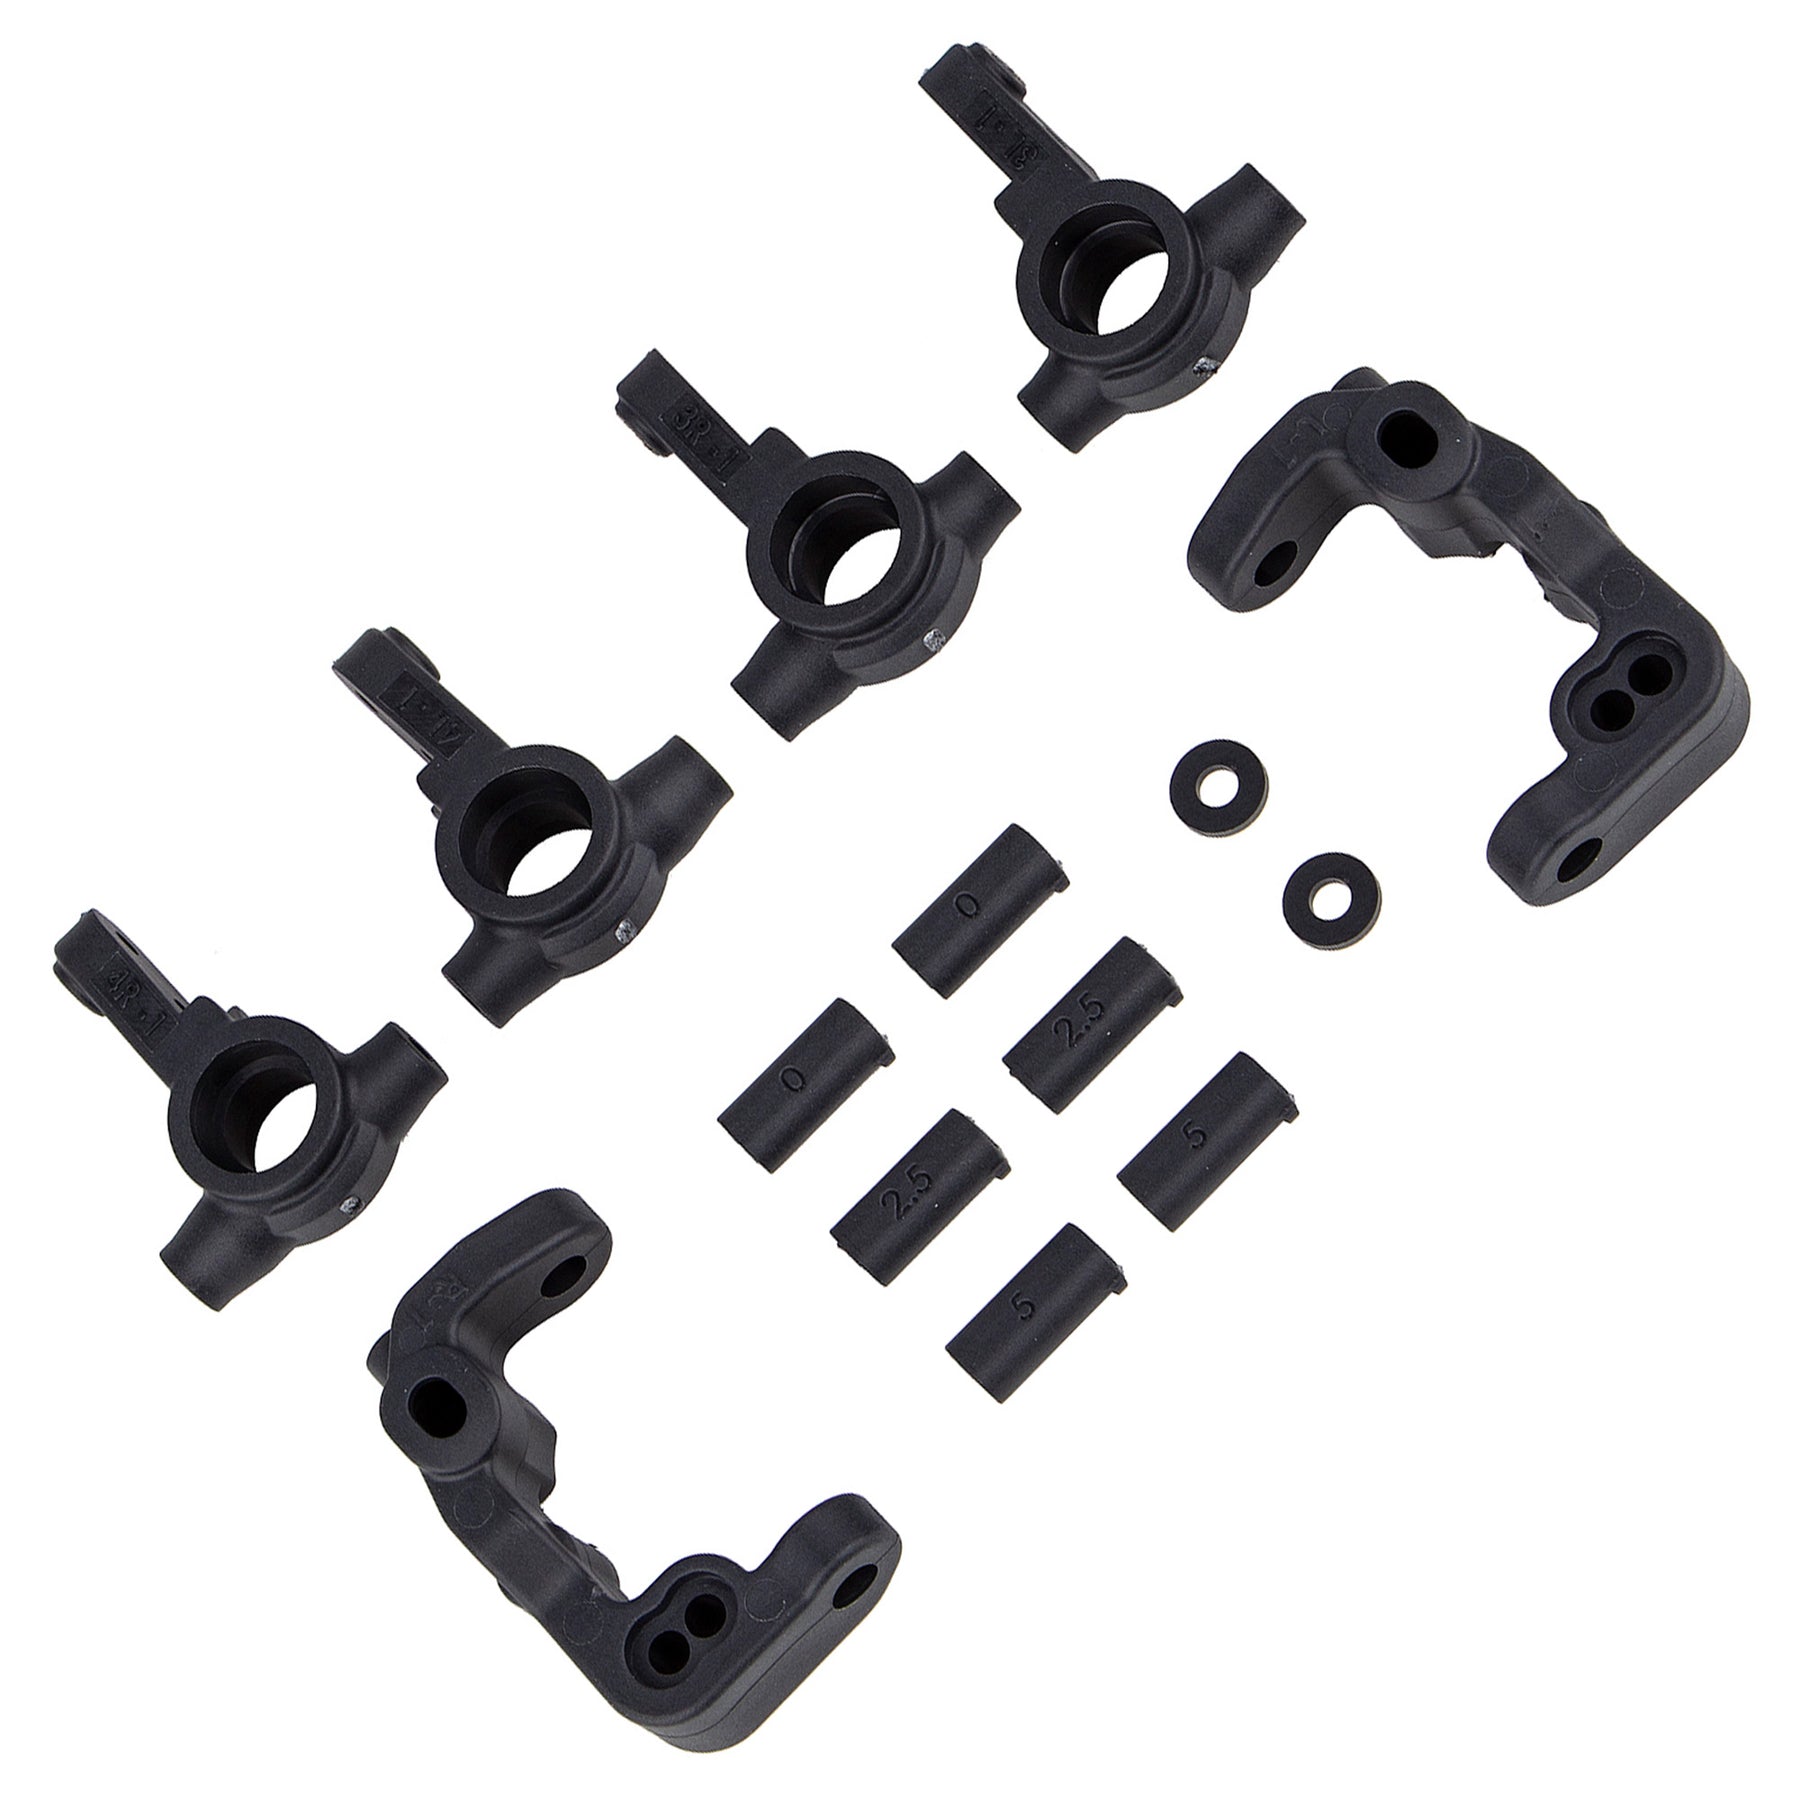 Team Associated B6.4 -1mm Caster and Steering Block Set - Carbon